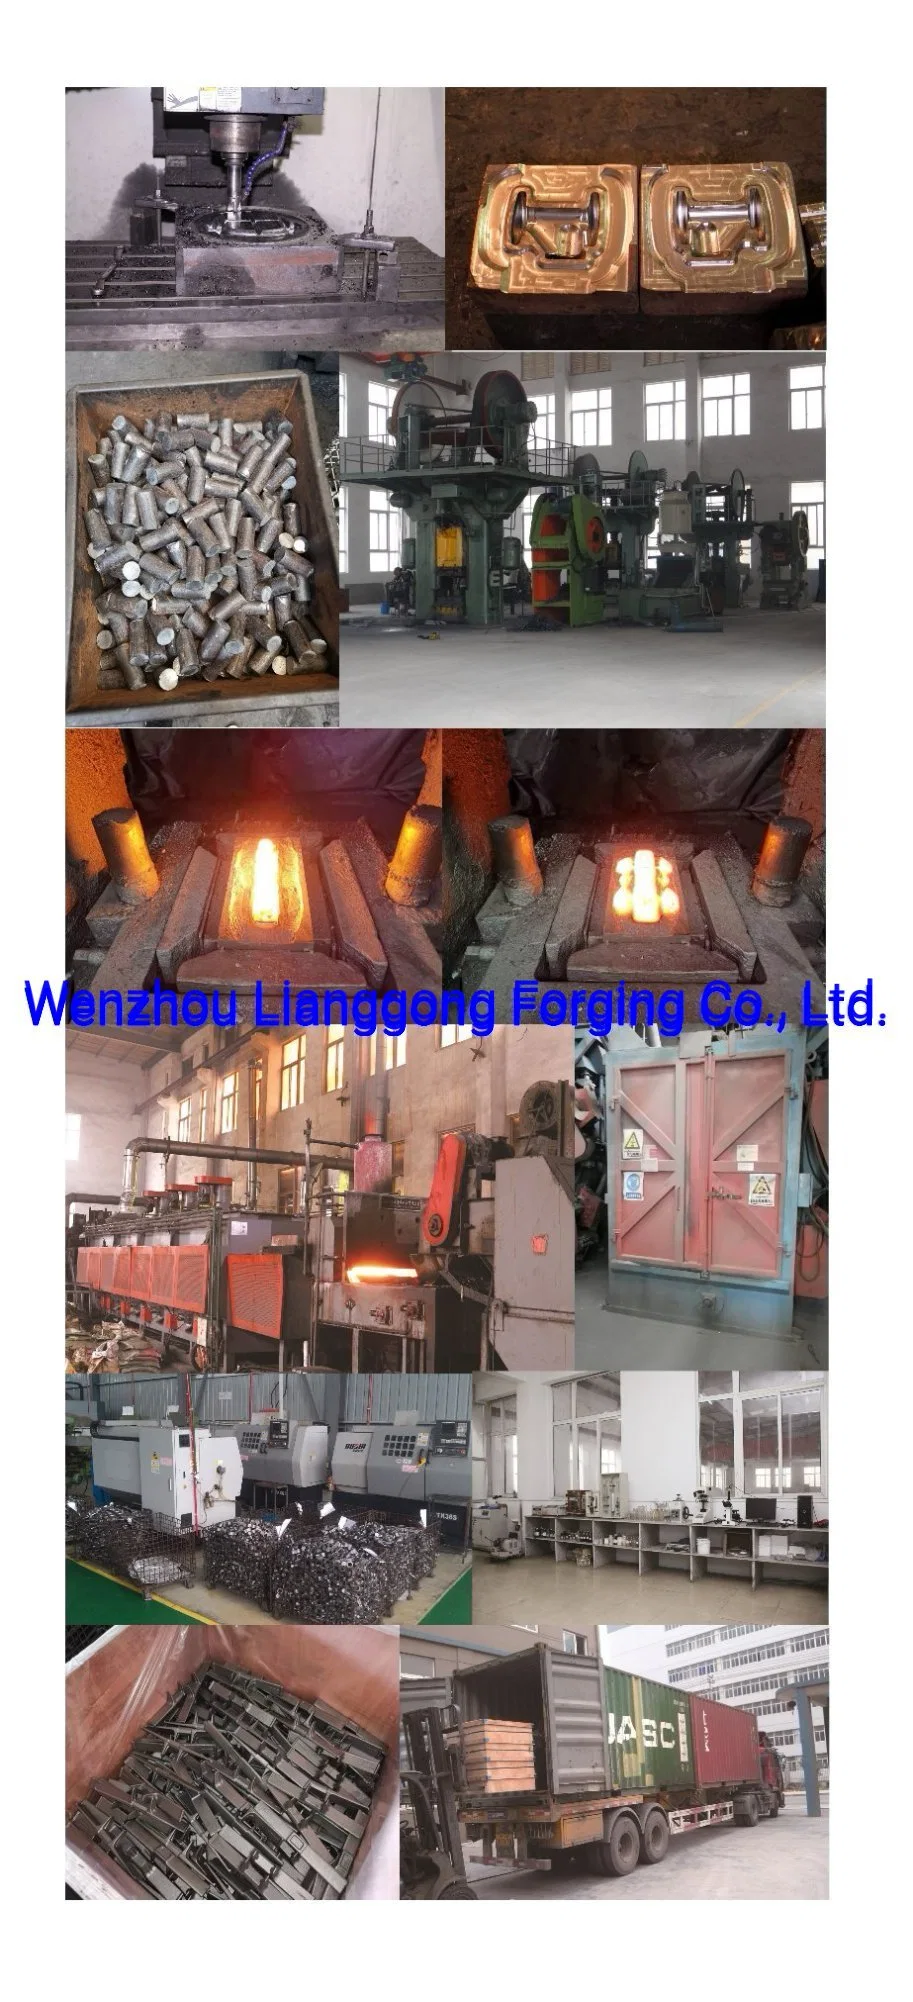 Custom Hot Die Forging/Forged Aluminum Parts in Automobile, Construction Machinery, Agricultural Machinery, Vehicle, Valve, Auto